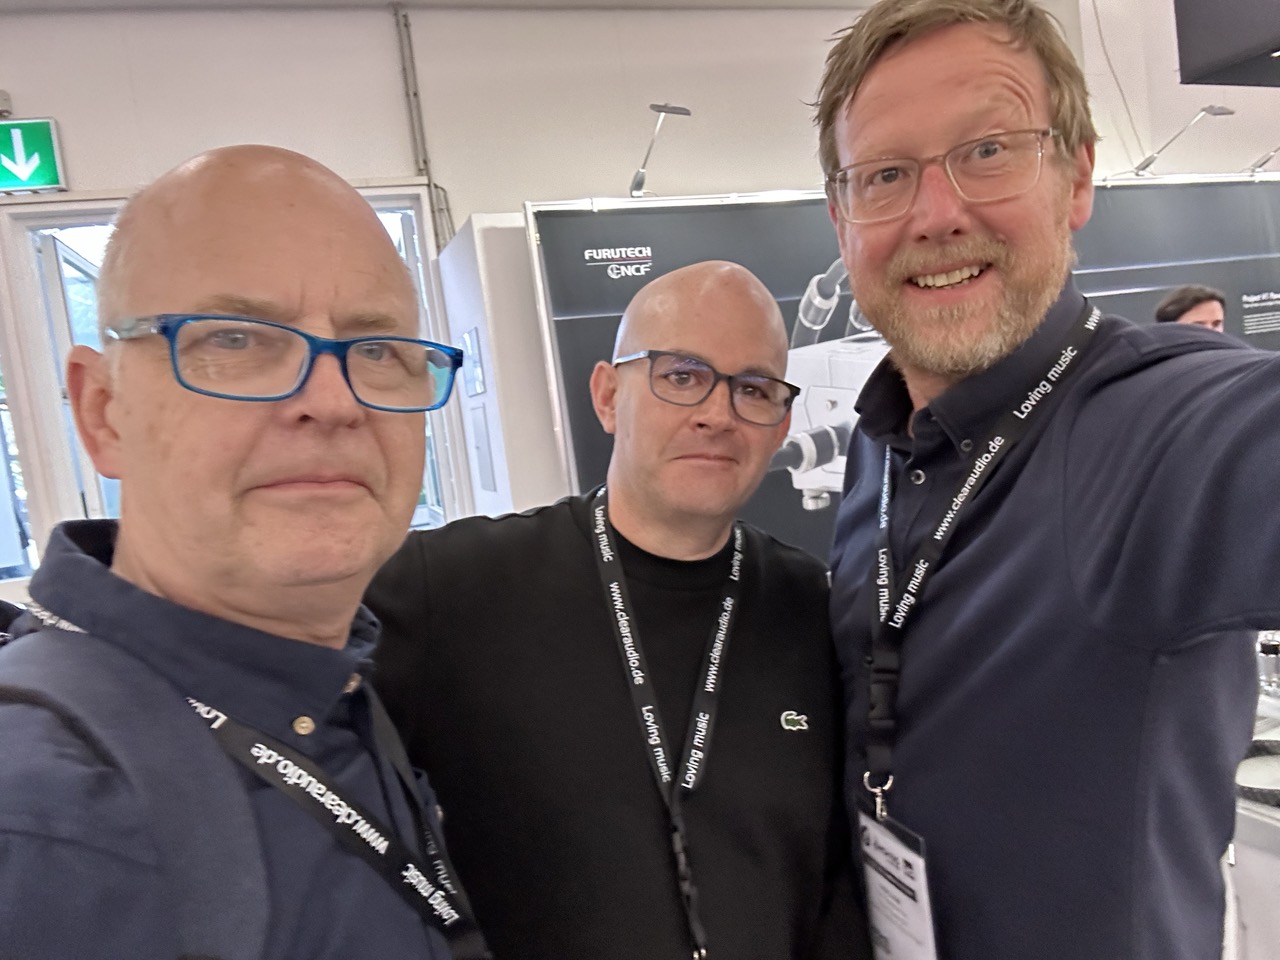 Bumped into the guys from Network Acoustics, great customers of ours who specialise in streaming and network cables. Always good to put a face to a name.